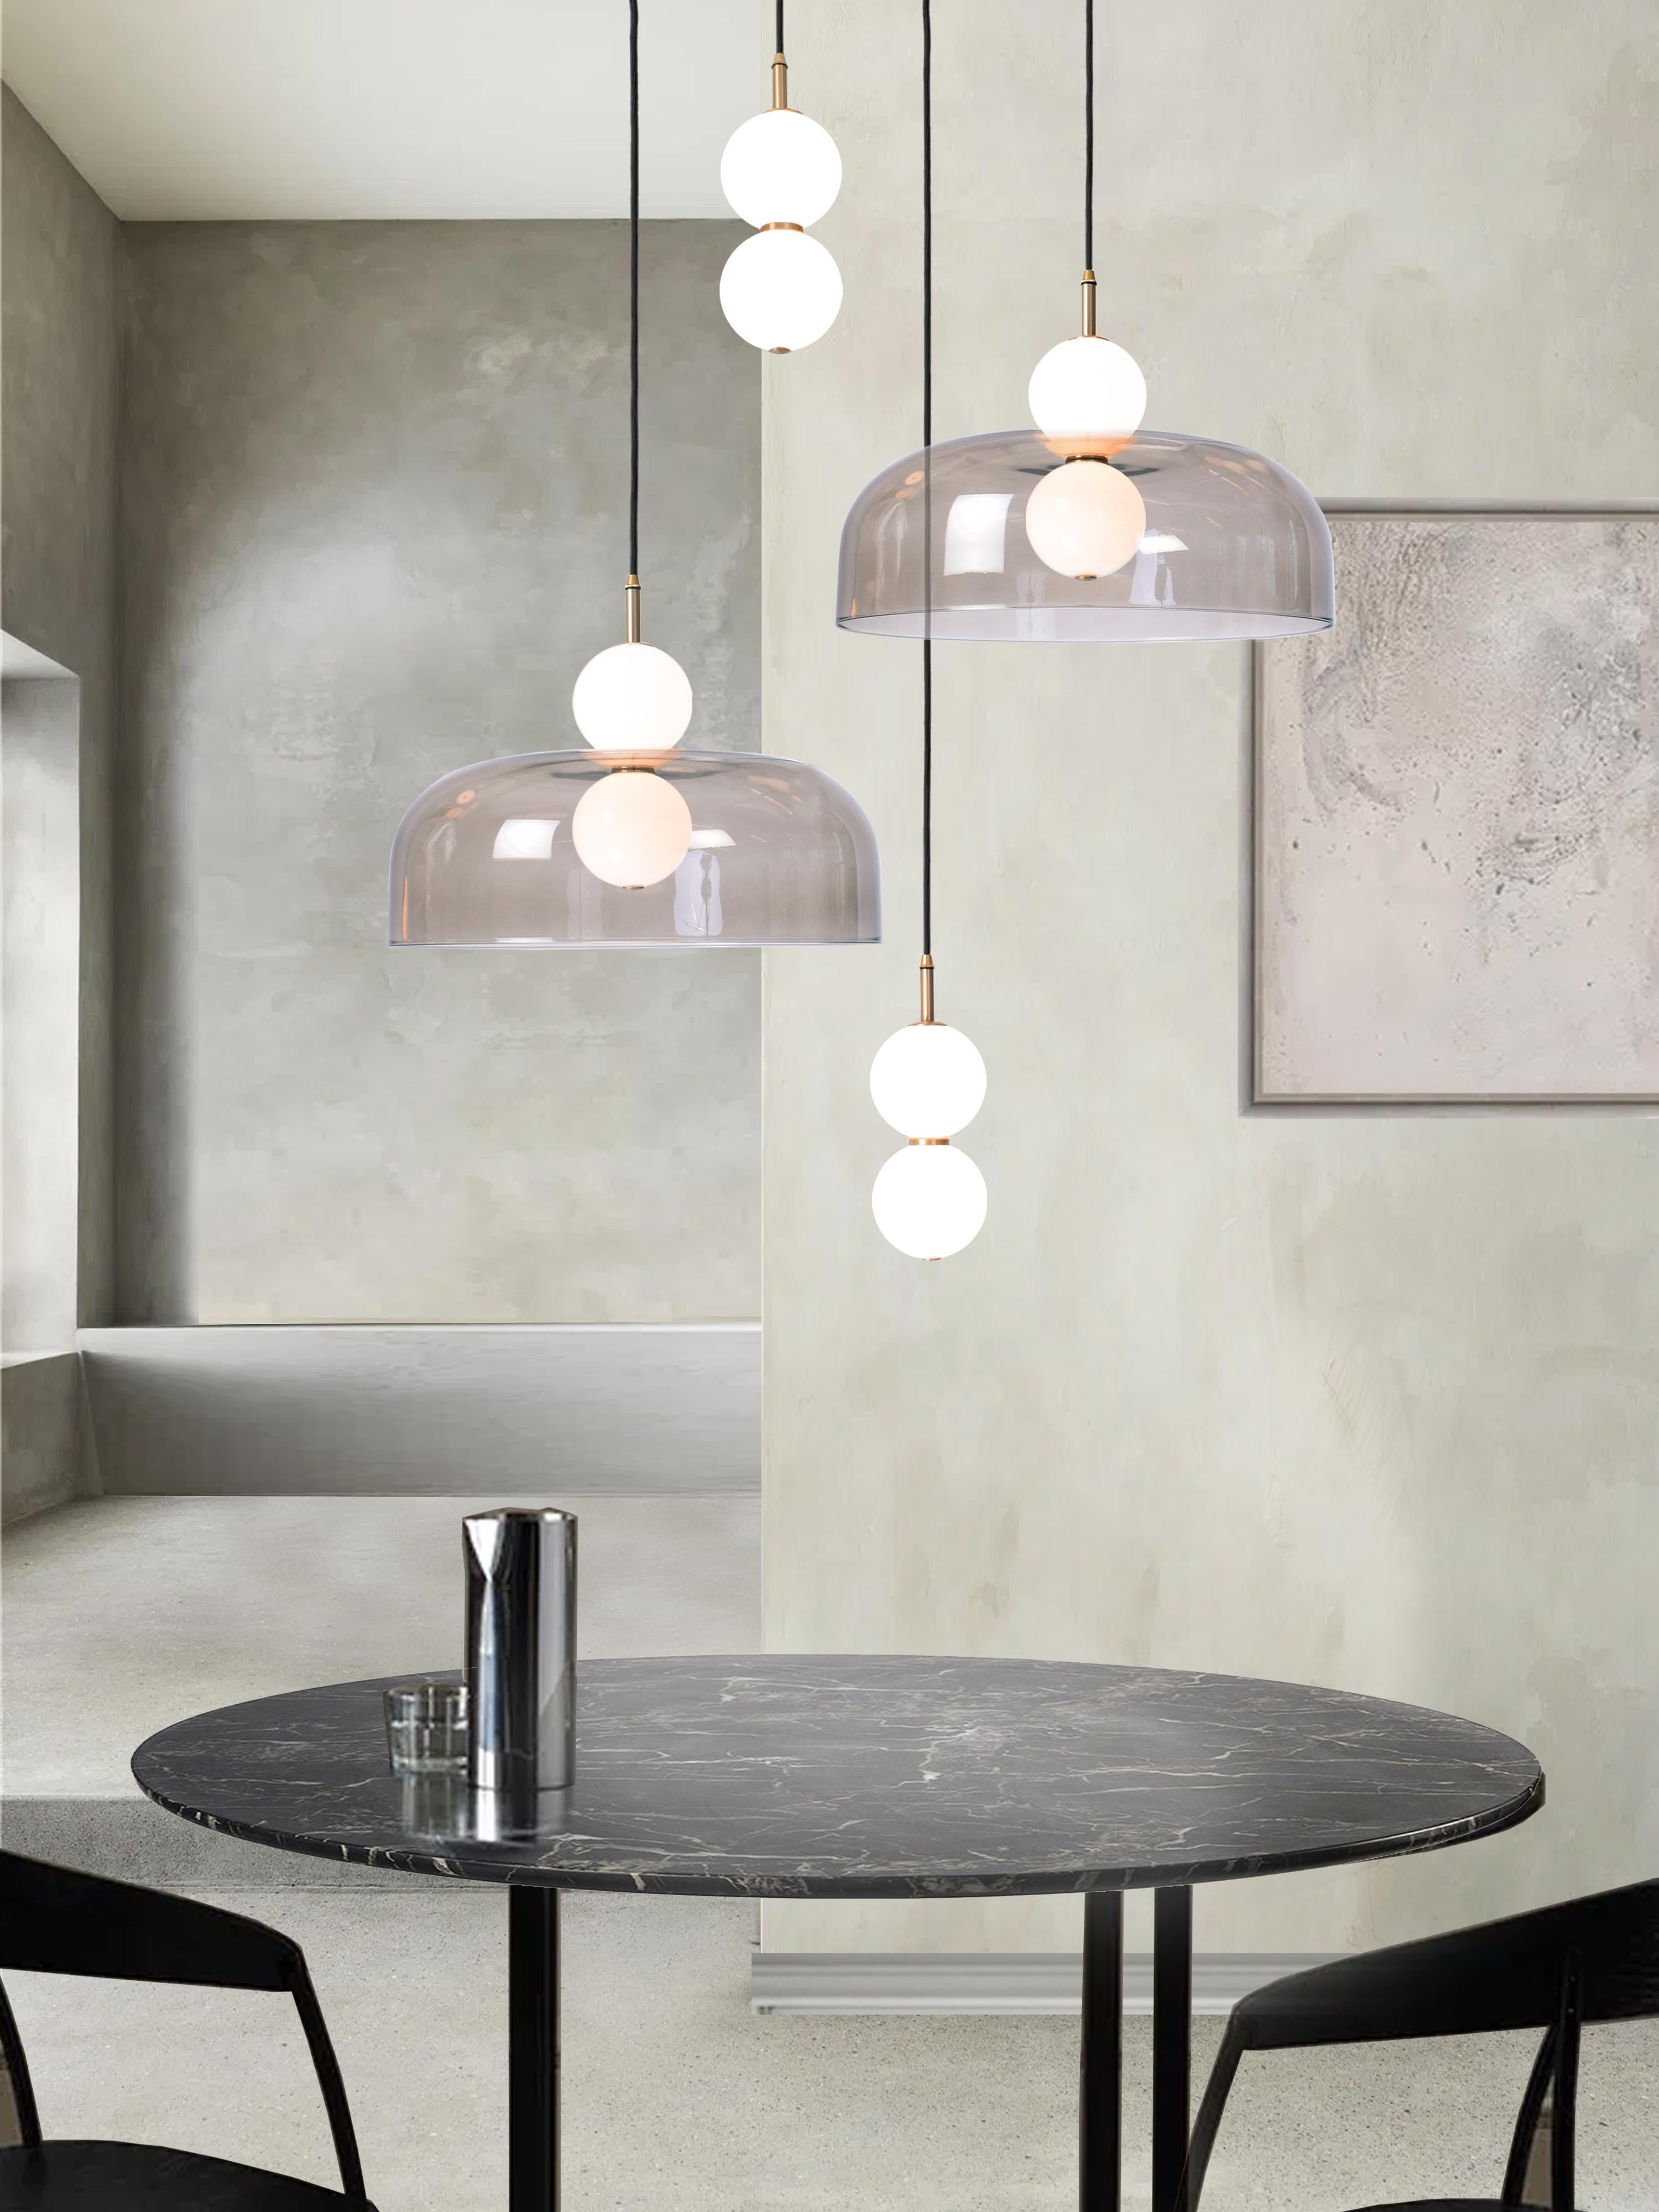 A hand spun shade suspended between white glass orbs, creating an echoed glow of light via the illusion of mirrored reflections.

Designed to be both functional and sculptural the Echo collection incorporates two pendant variations; lamp and